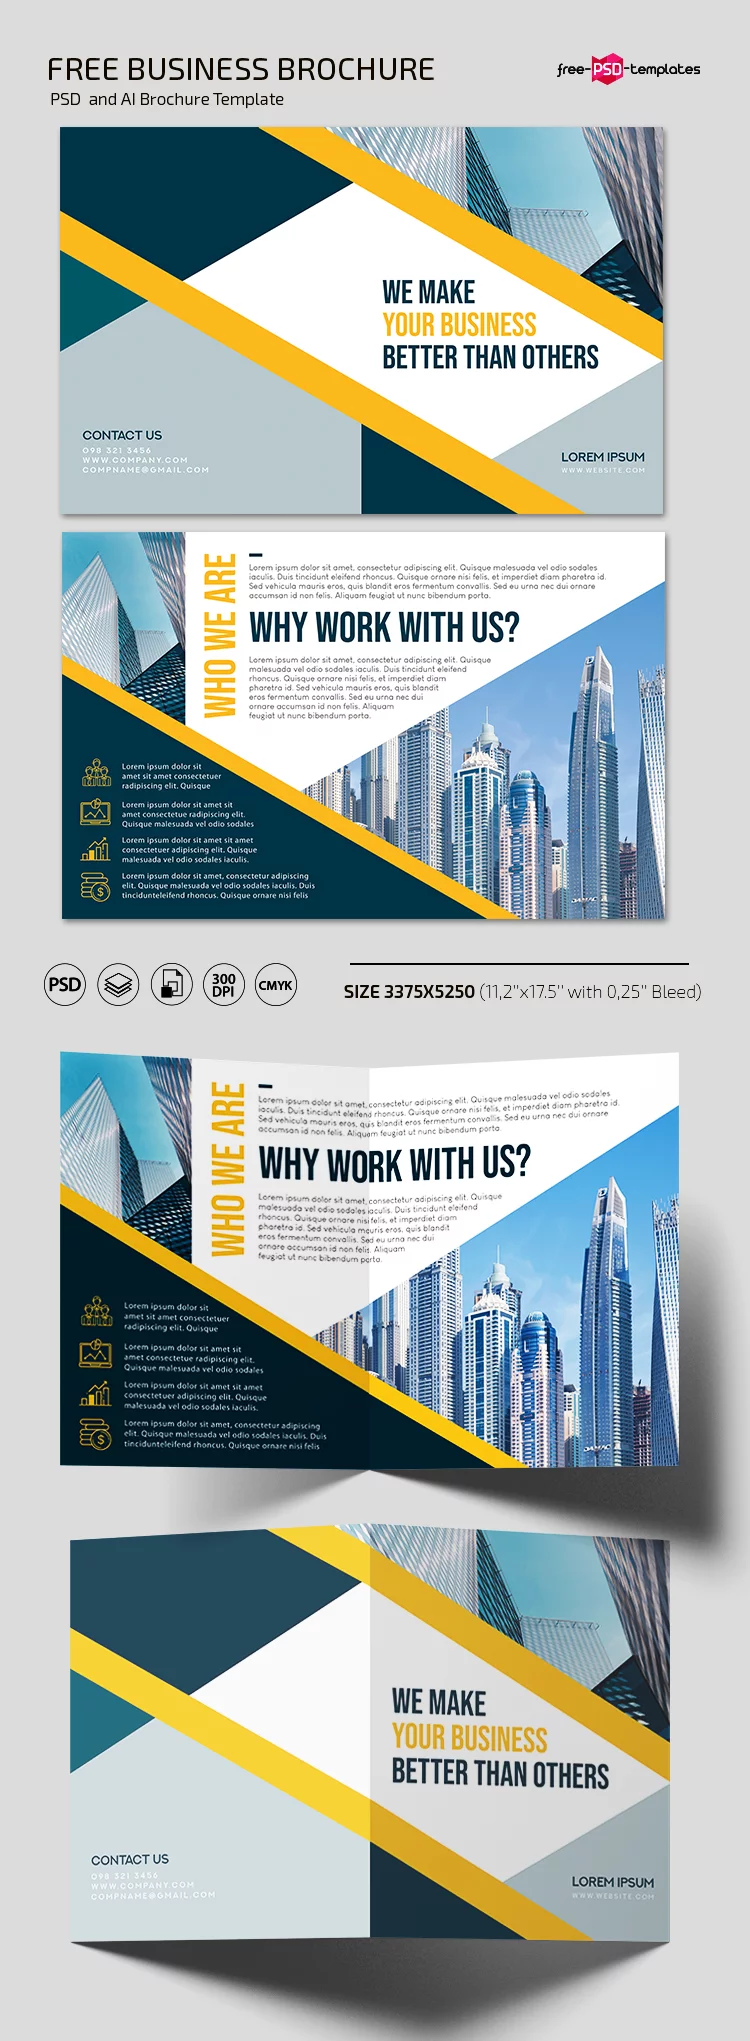 Free Business Brochure Template in PSD + Vector (.ai)